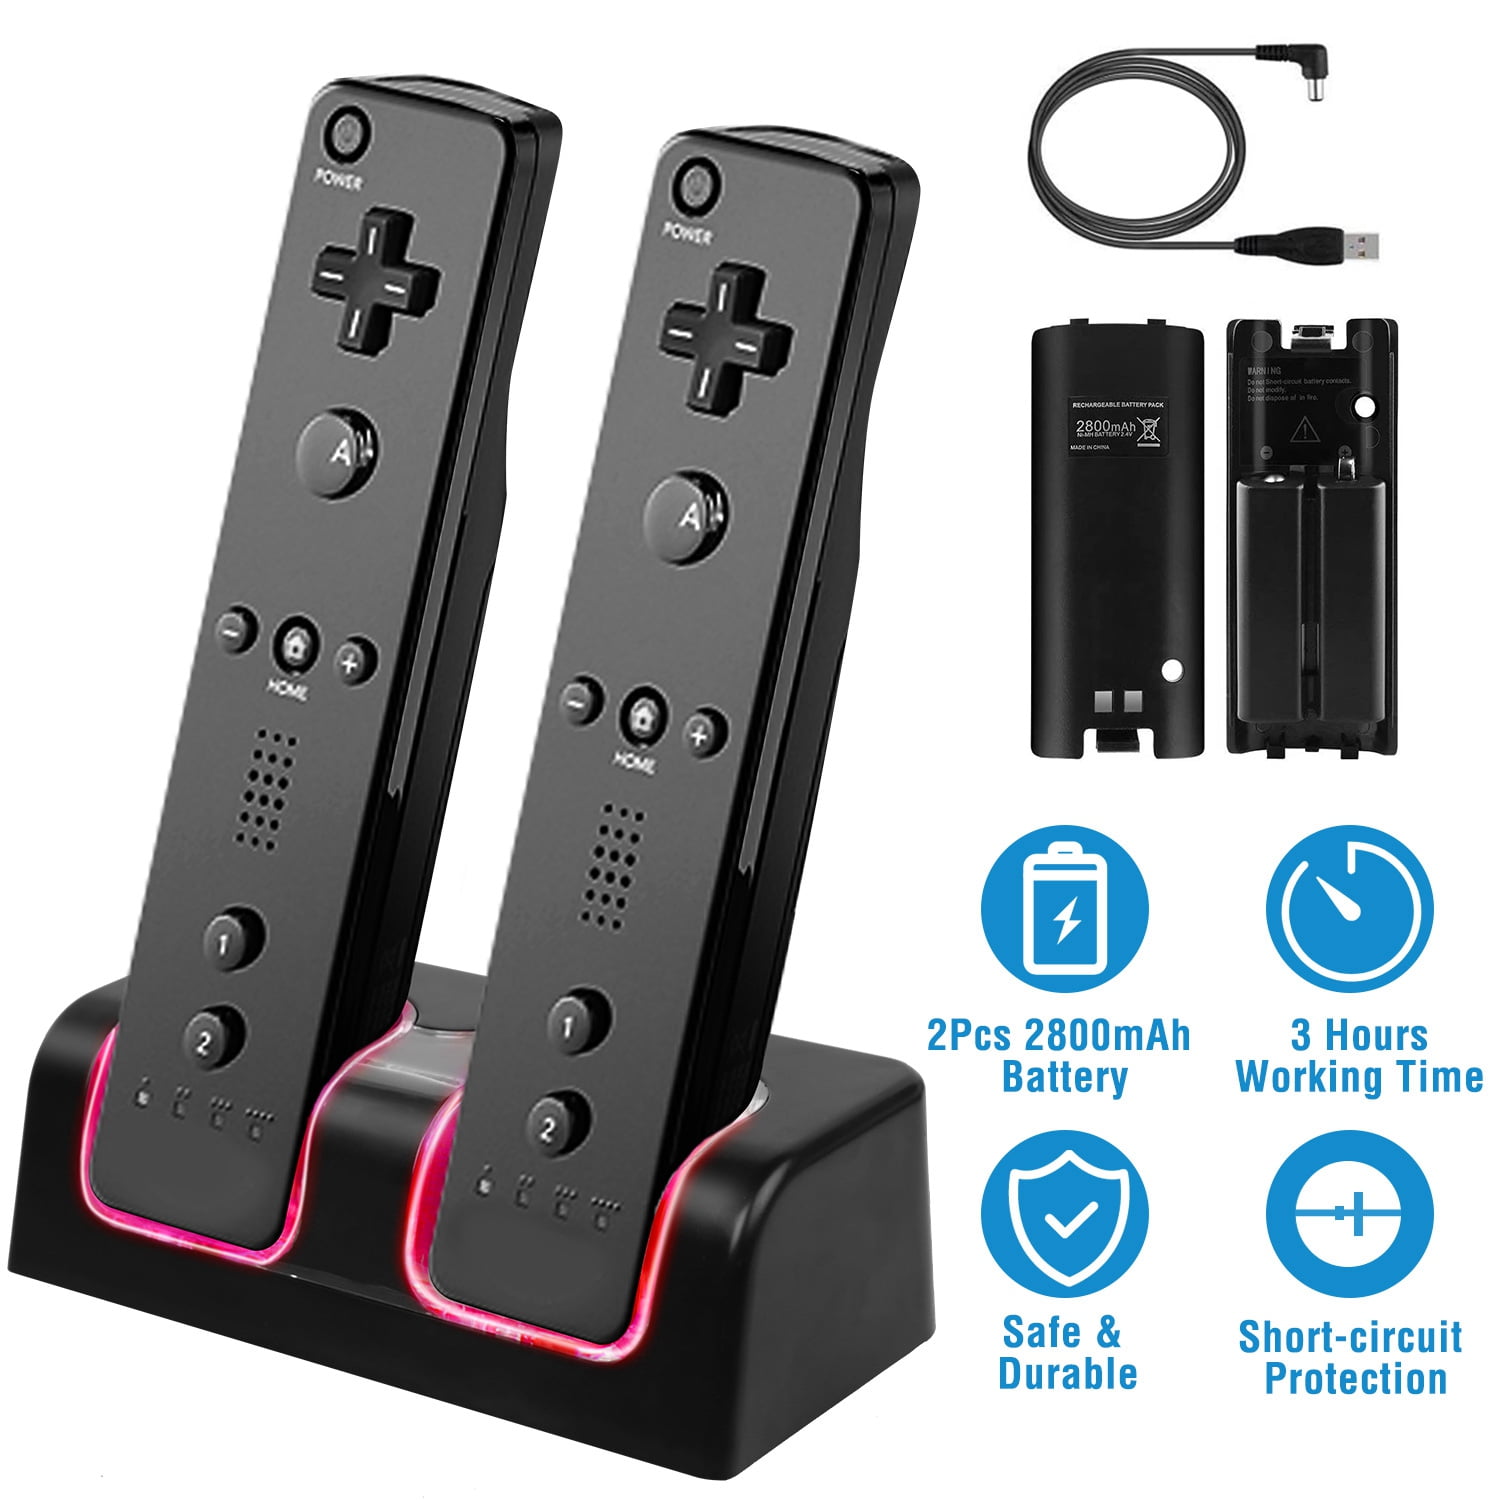 Wii Remote Charger Dual Charging Dock Station with Rechargeable Batteries for  Nintendo Wii and WiiU (Black or White Options) 